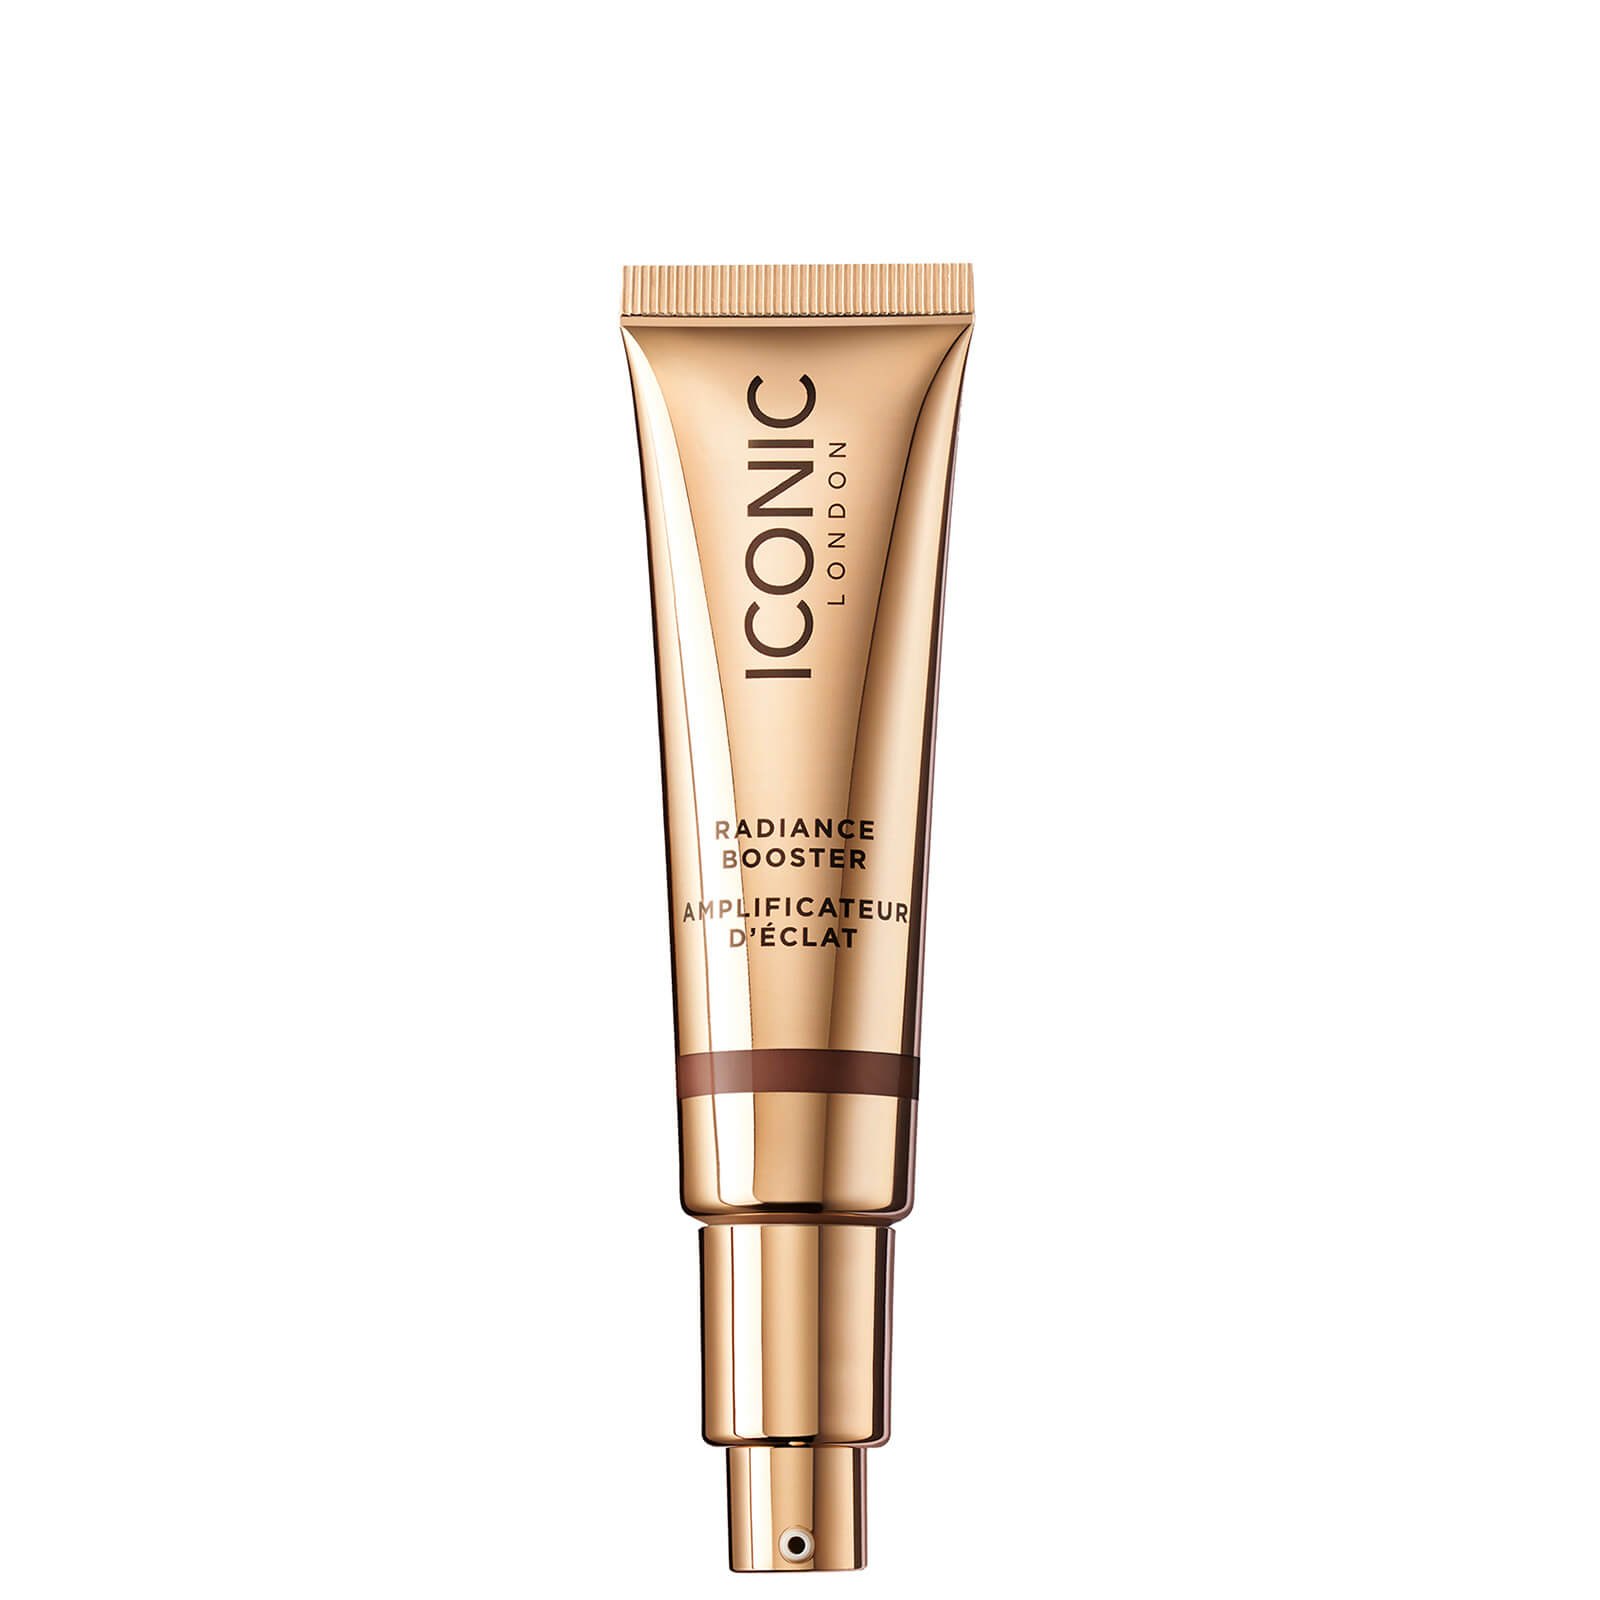 ICONIC London Radiance Booster 30ml (Various Shades) - Rich Glow